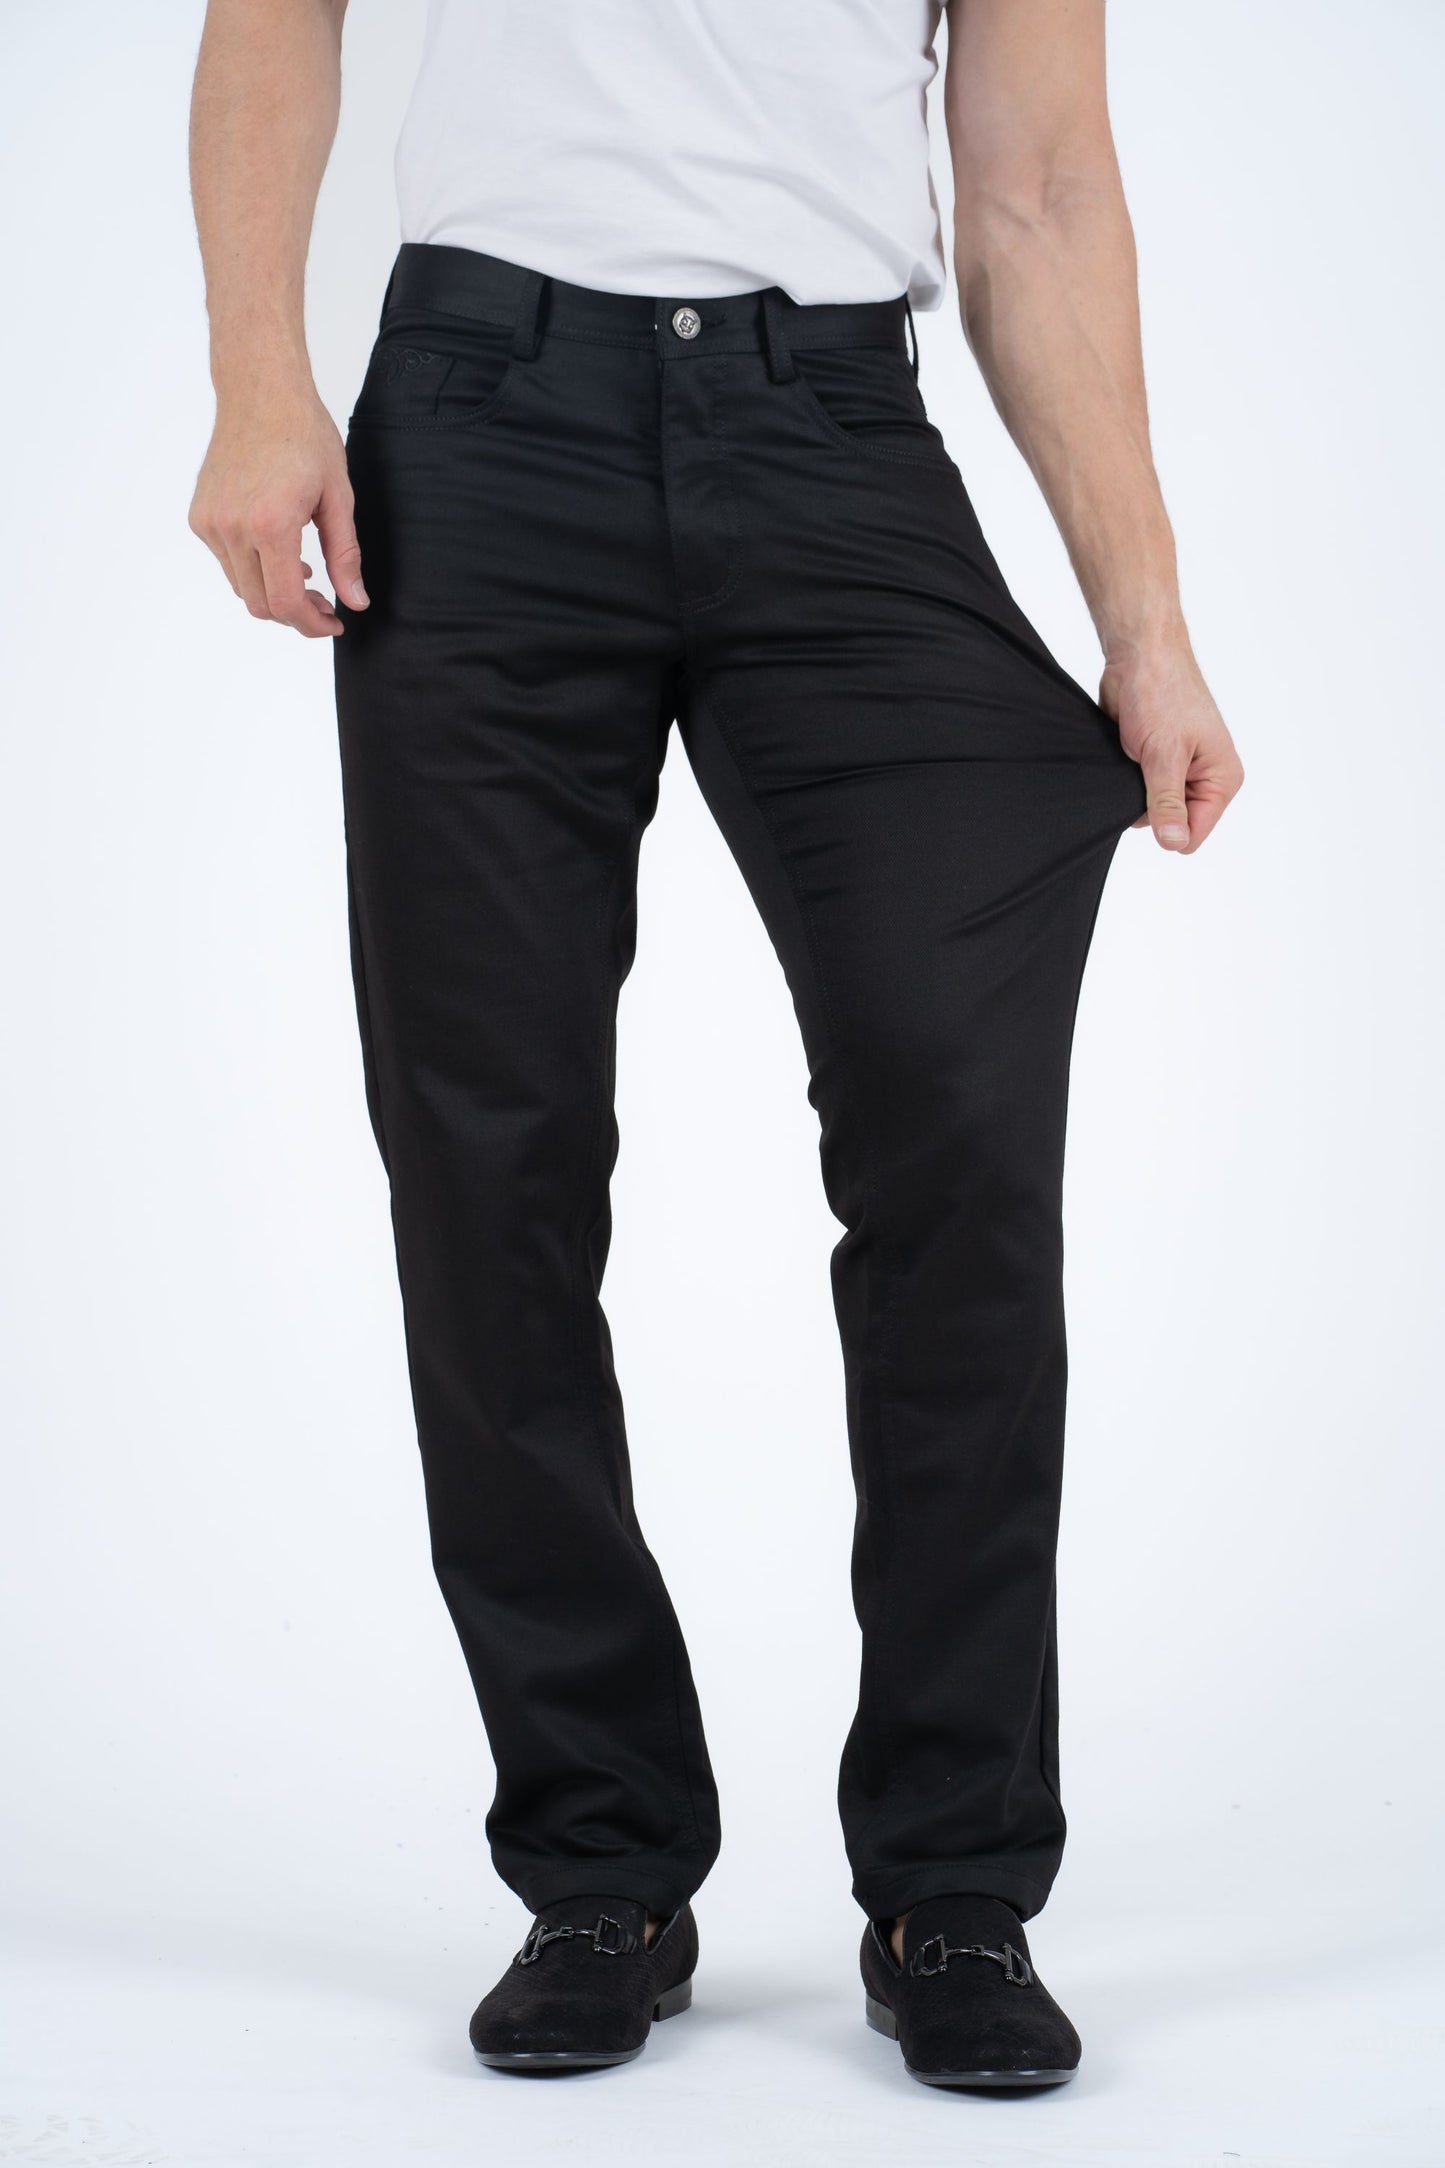 Slade Men's Black Relaxed Fit Stretch Pants